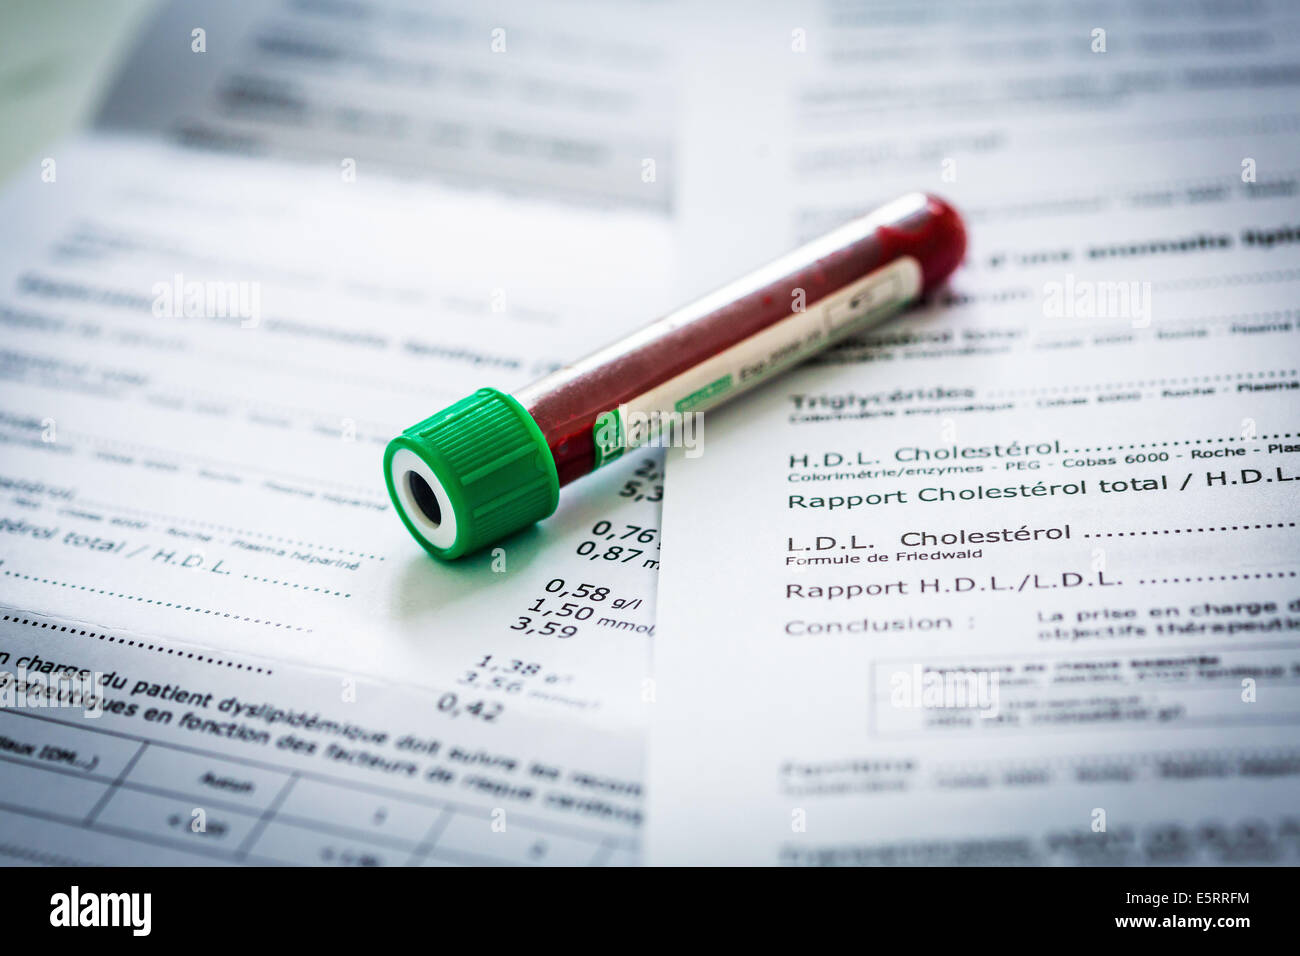 Lipid blood test result sheet with blood sample. Stock Photo